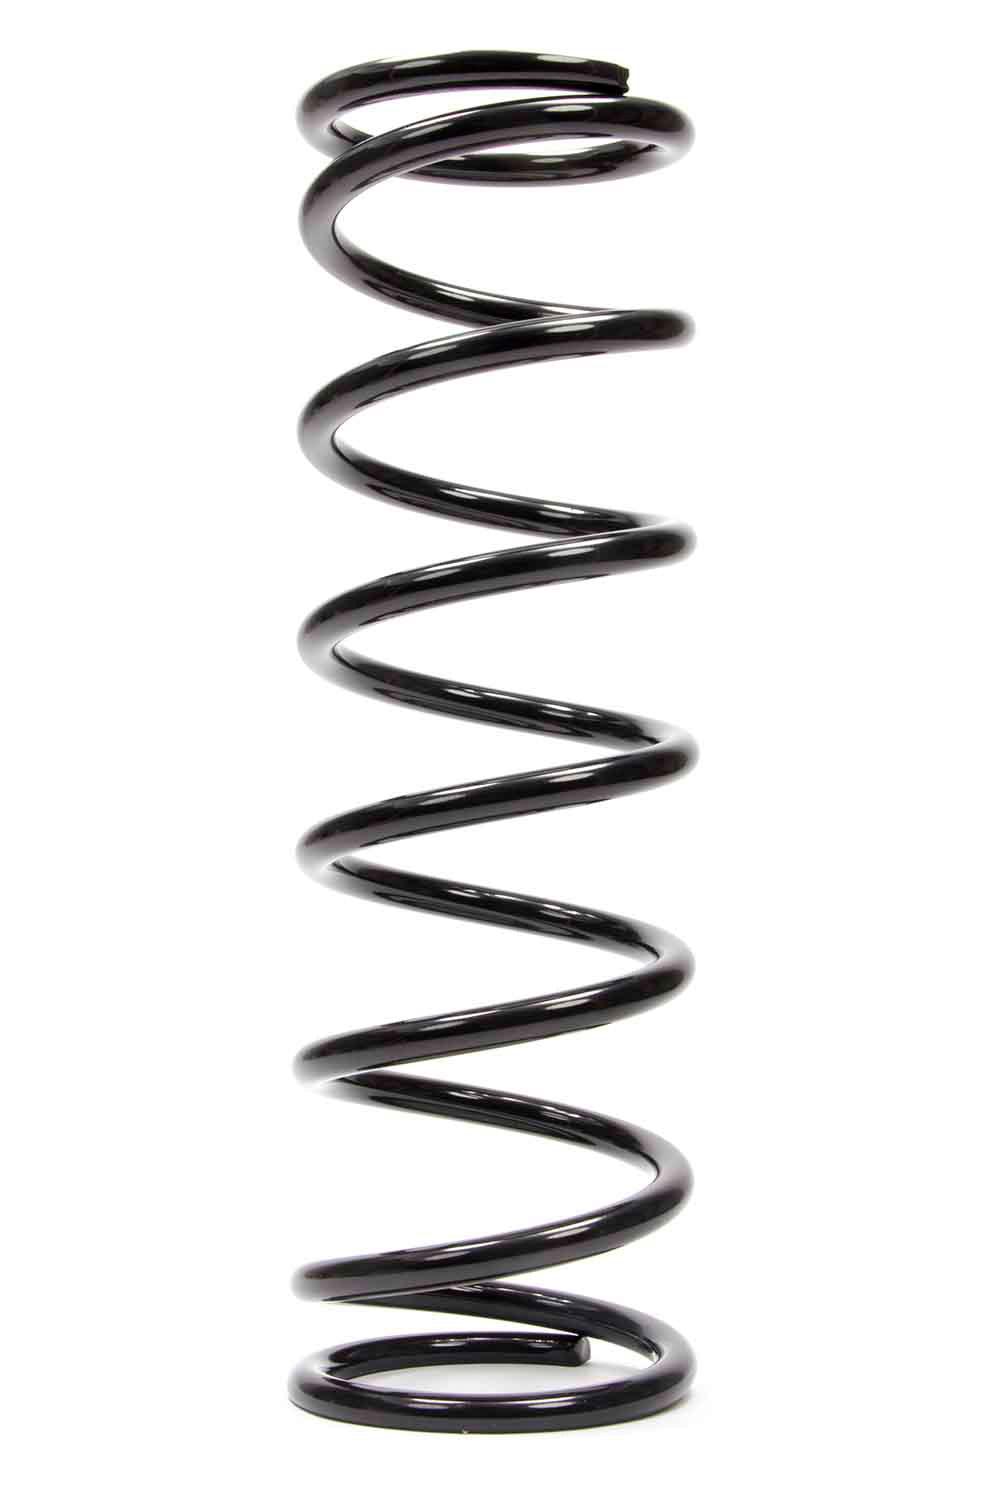 Conv Rear Spring 5in x 16in x 150 - Burlile Performance Products